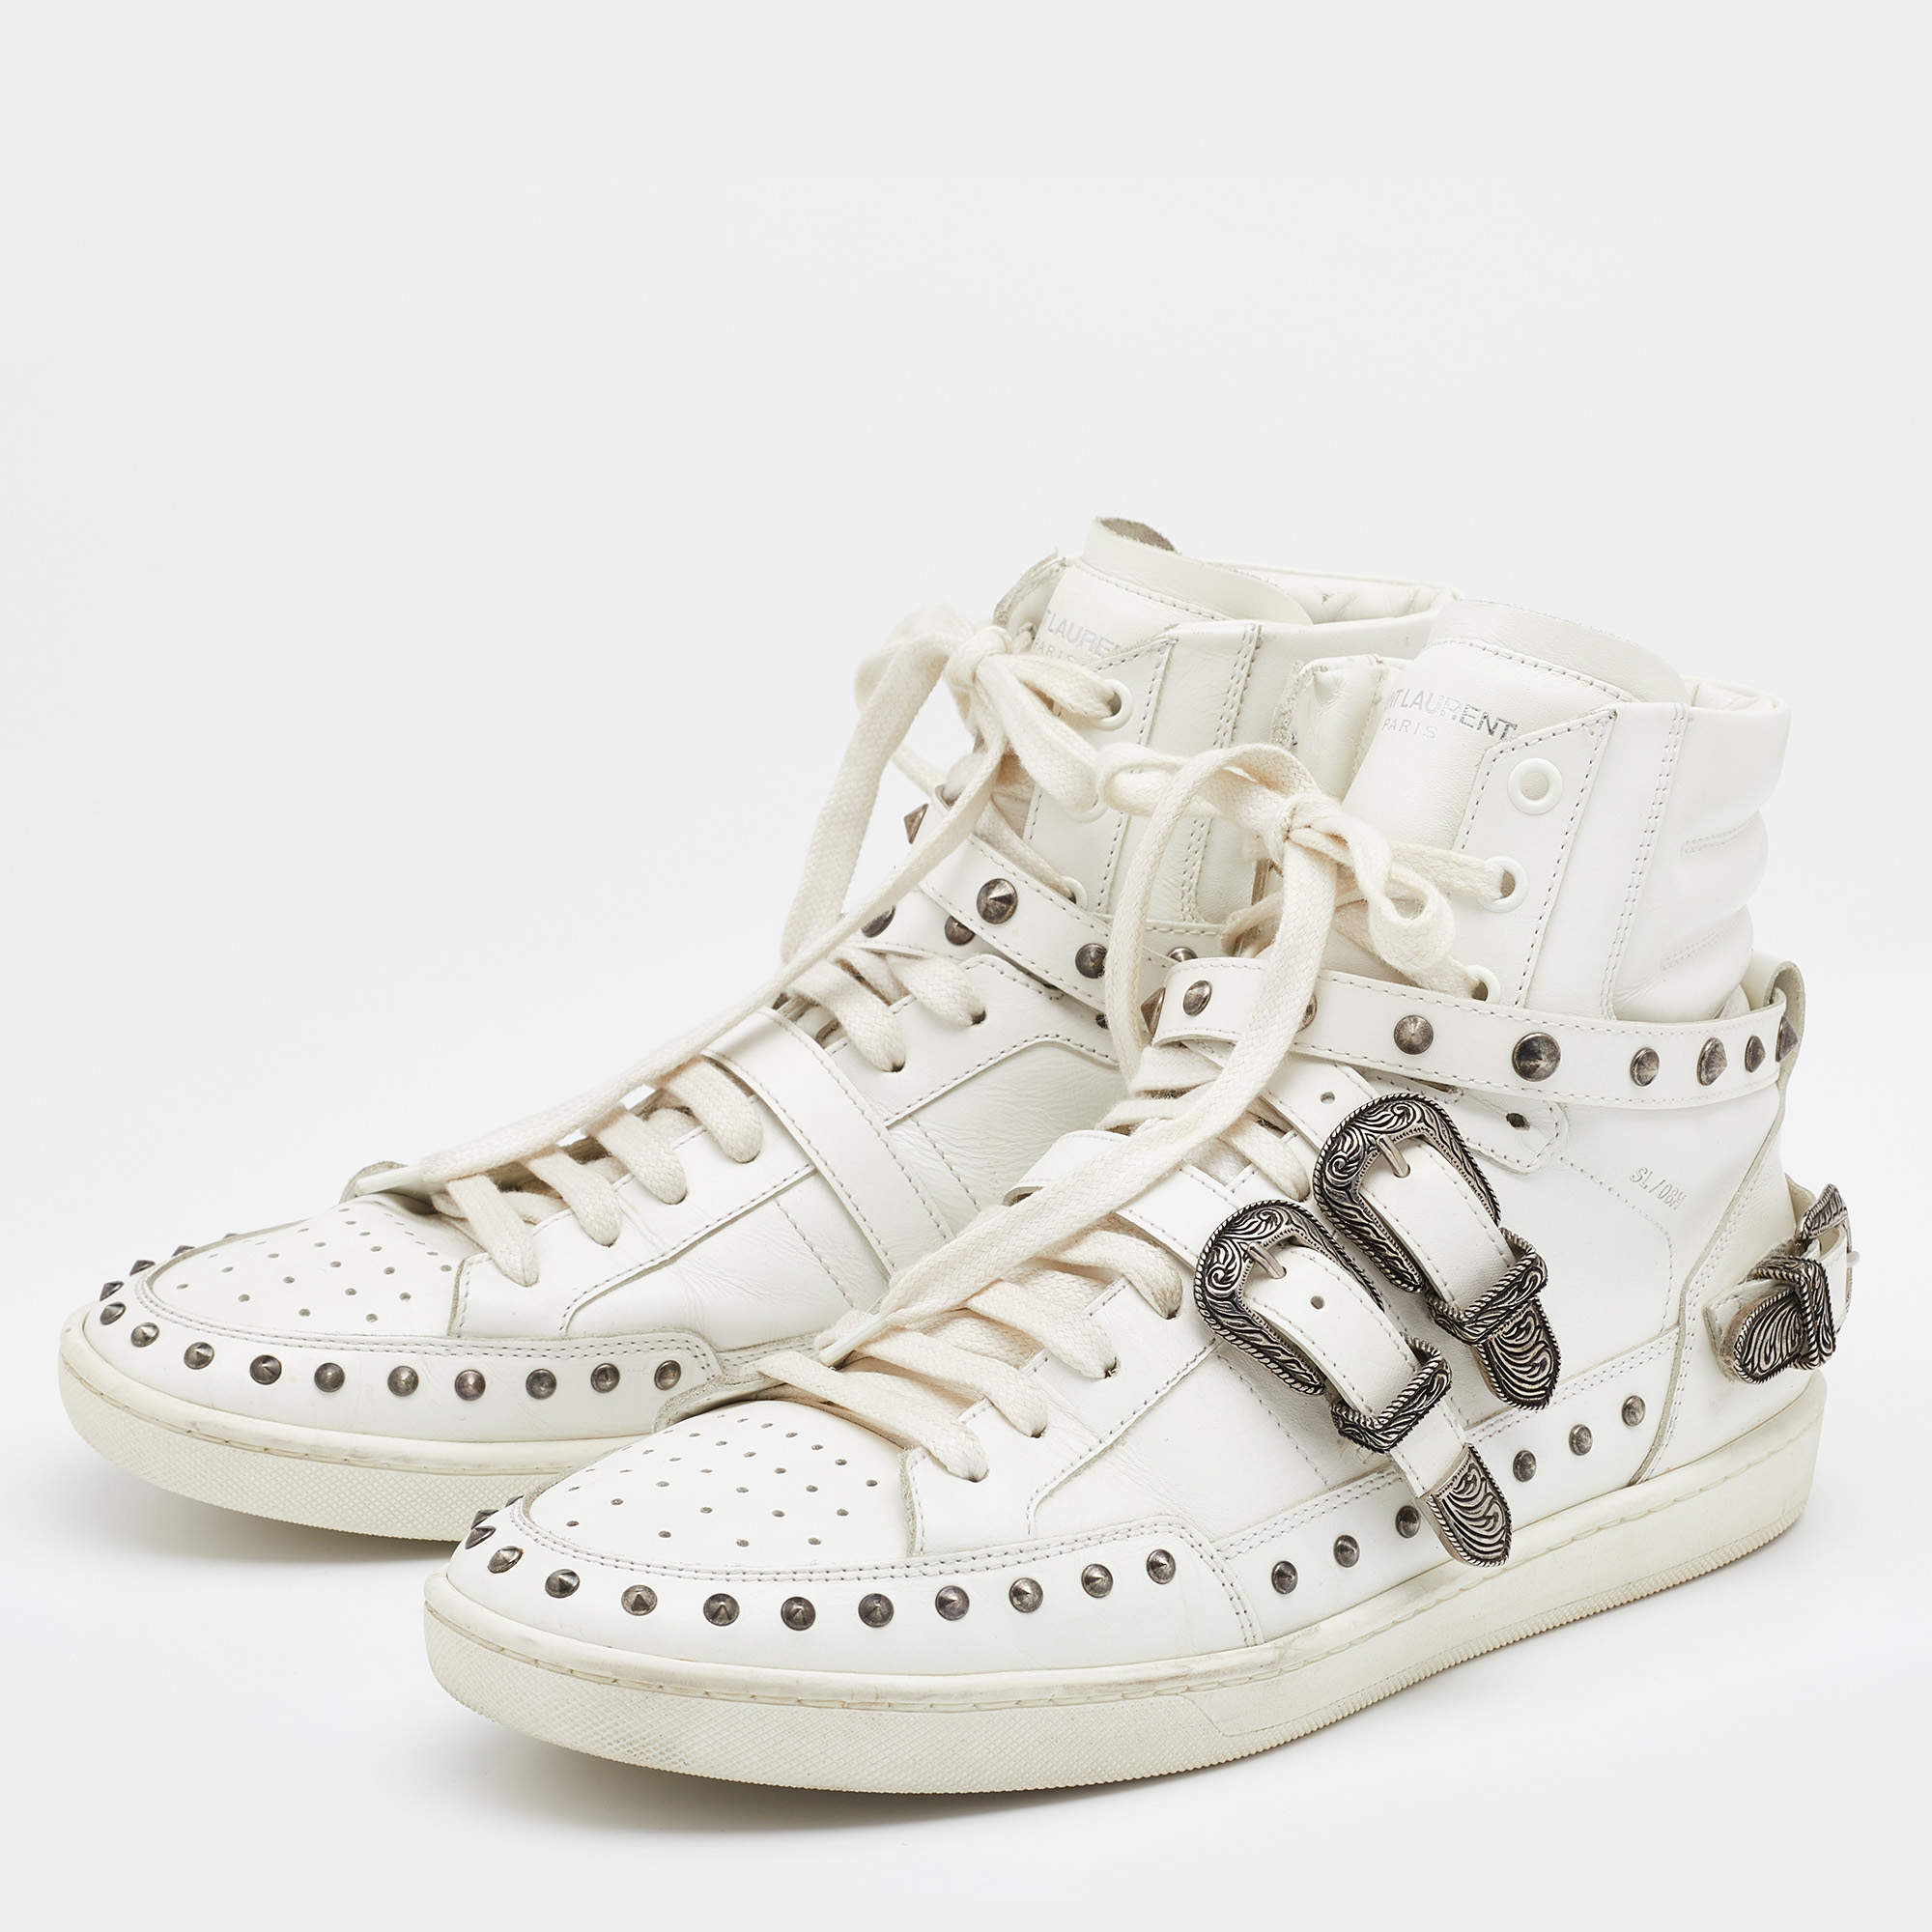 Saint Laurent White Leather Studded High Top Sneakers Size 44